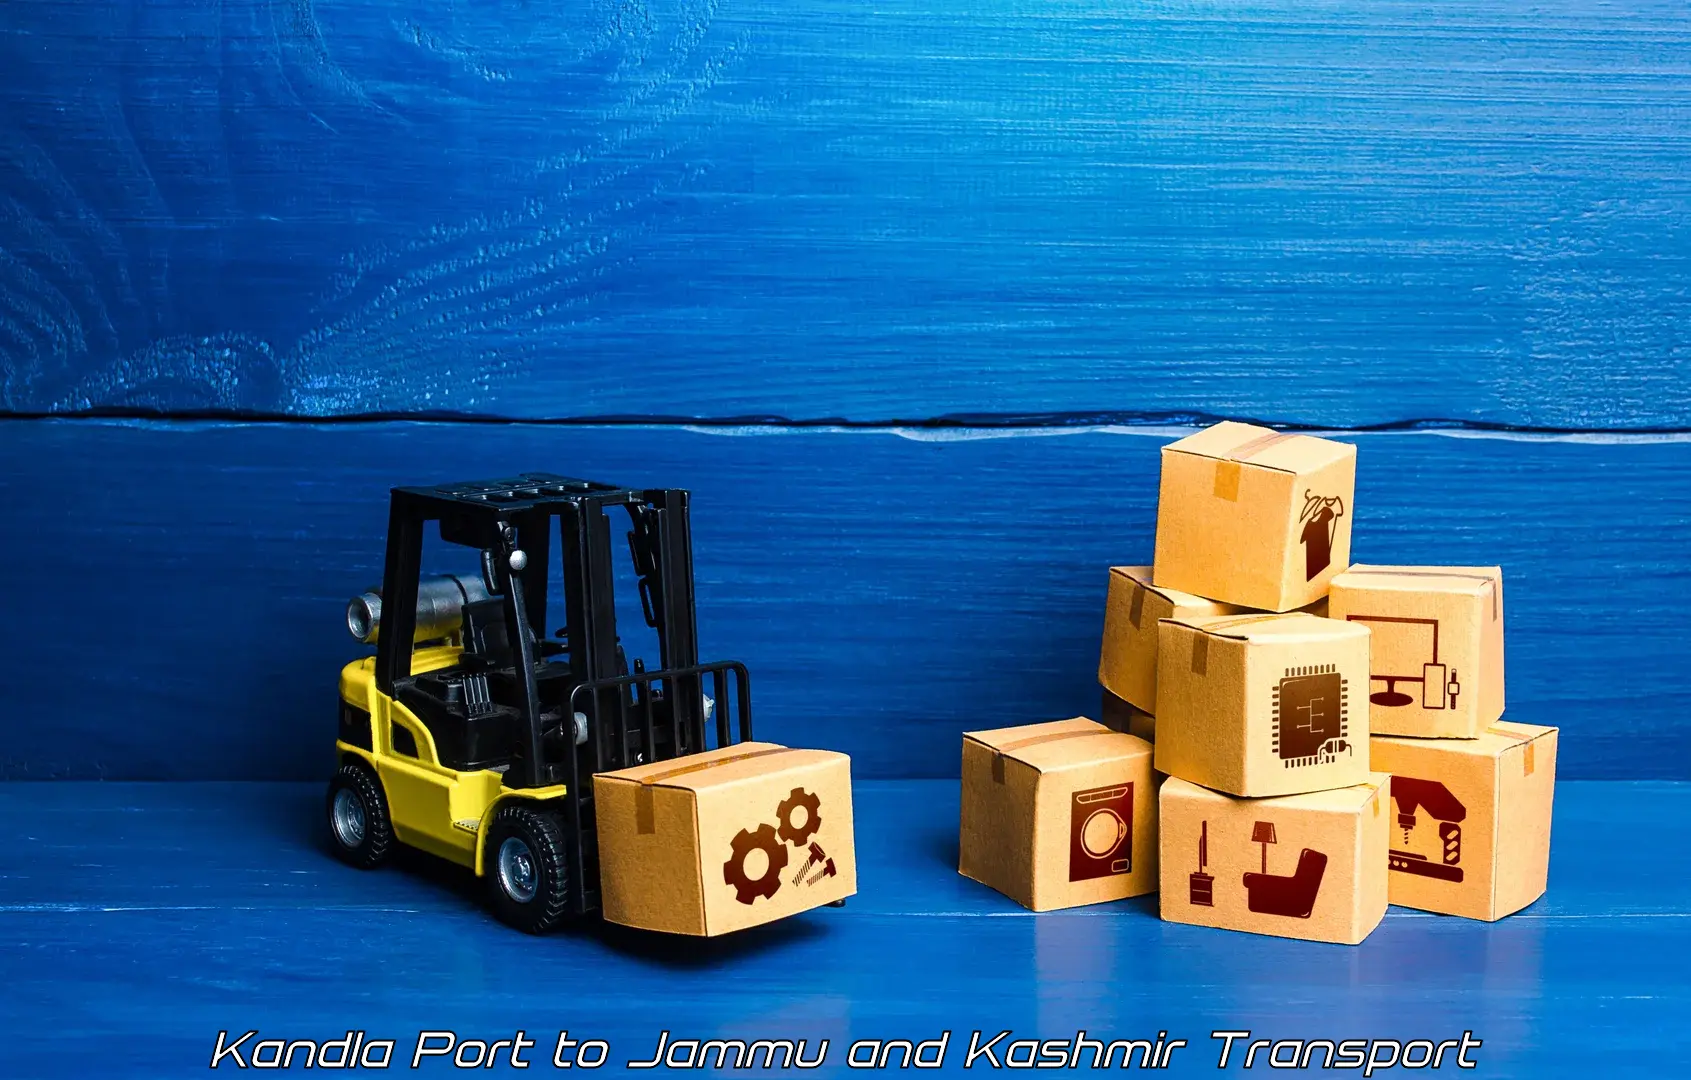 Package delivery services Kandla Port to Jammu and Kashmir